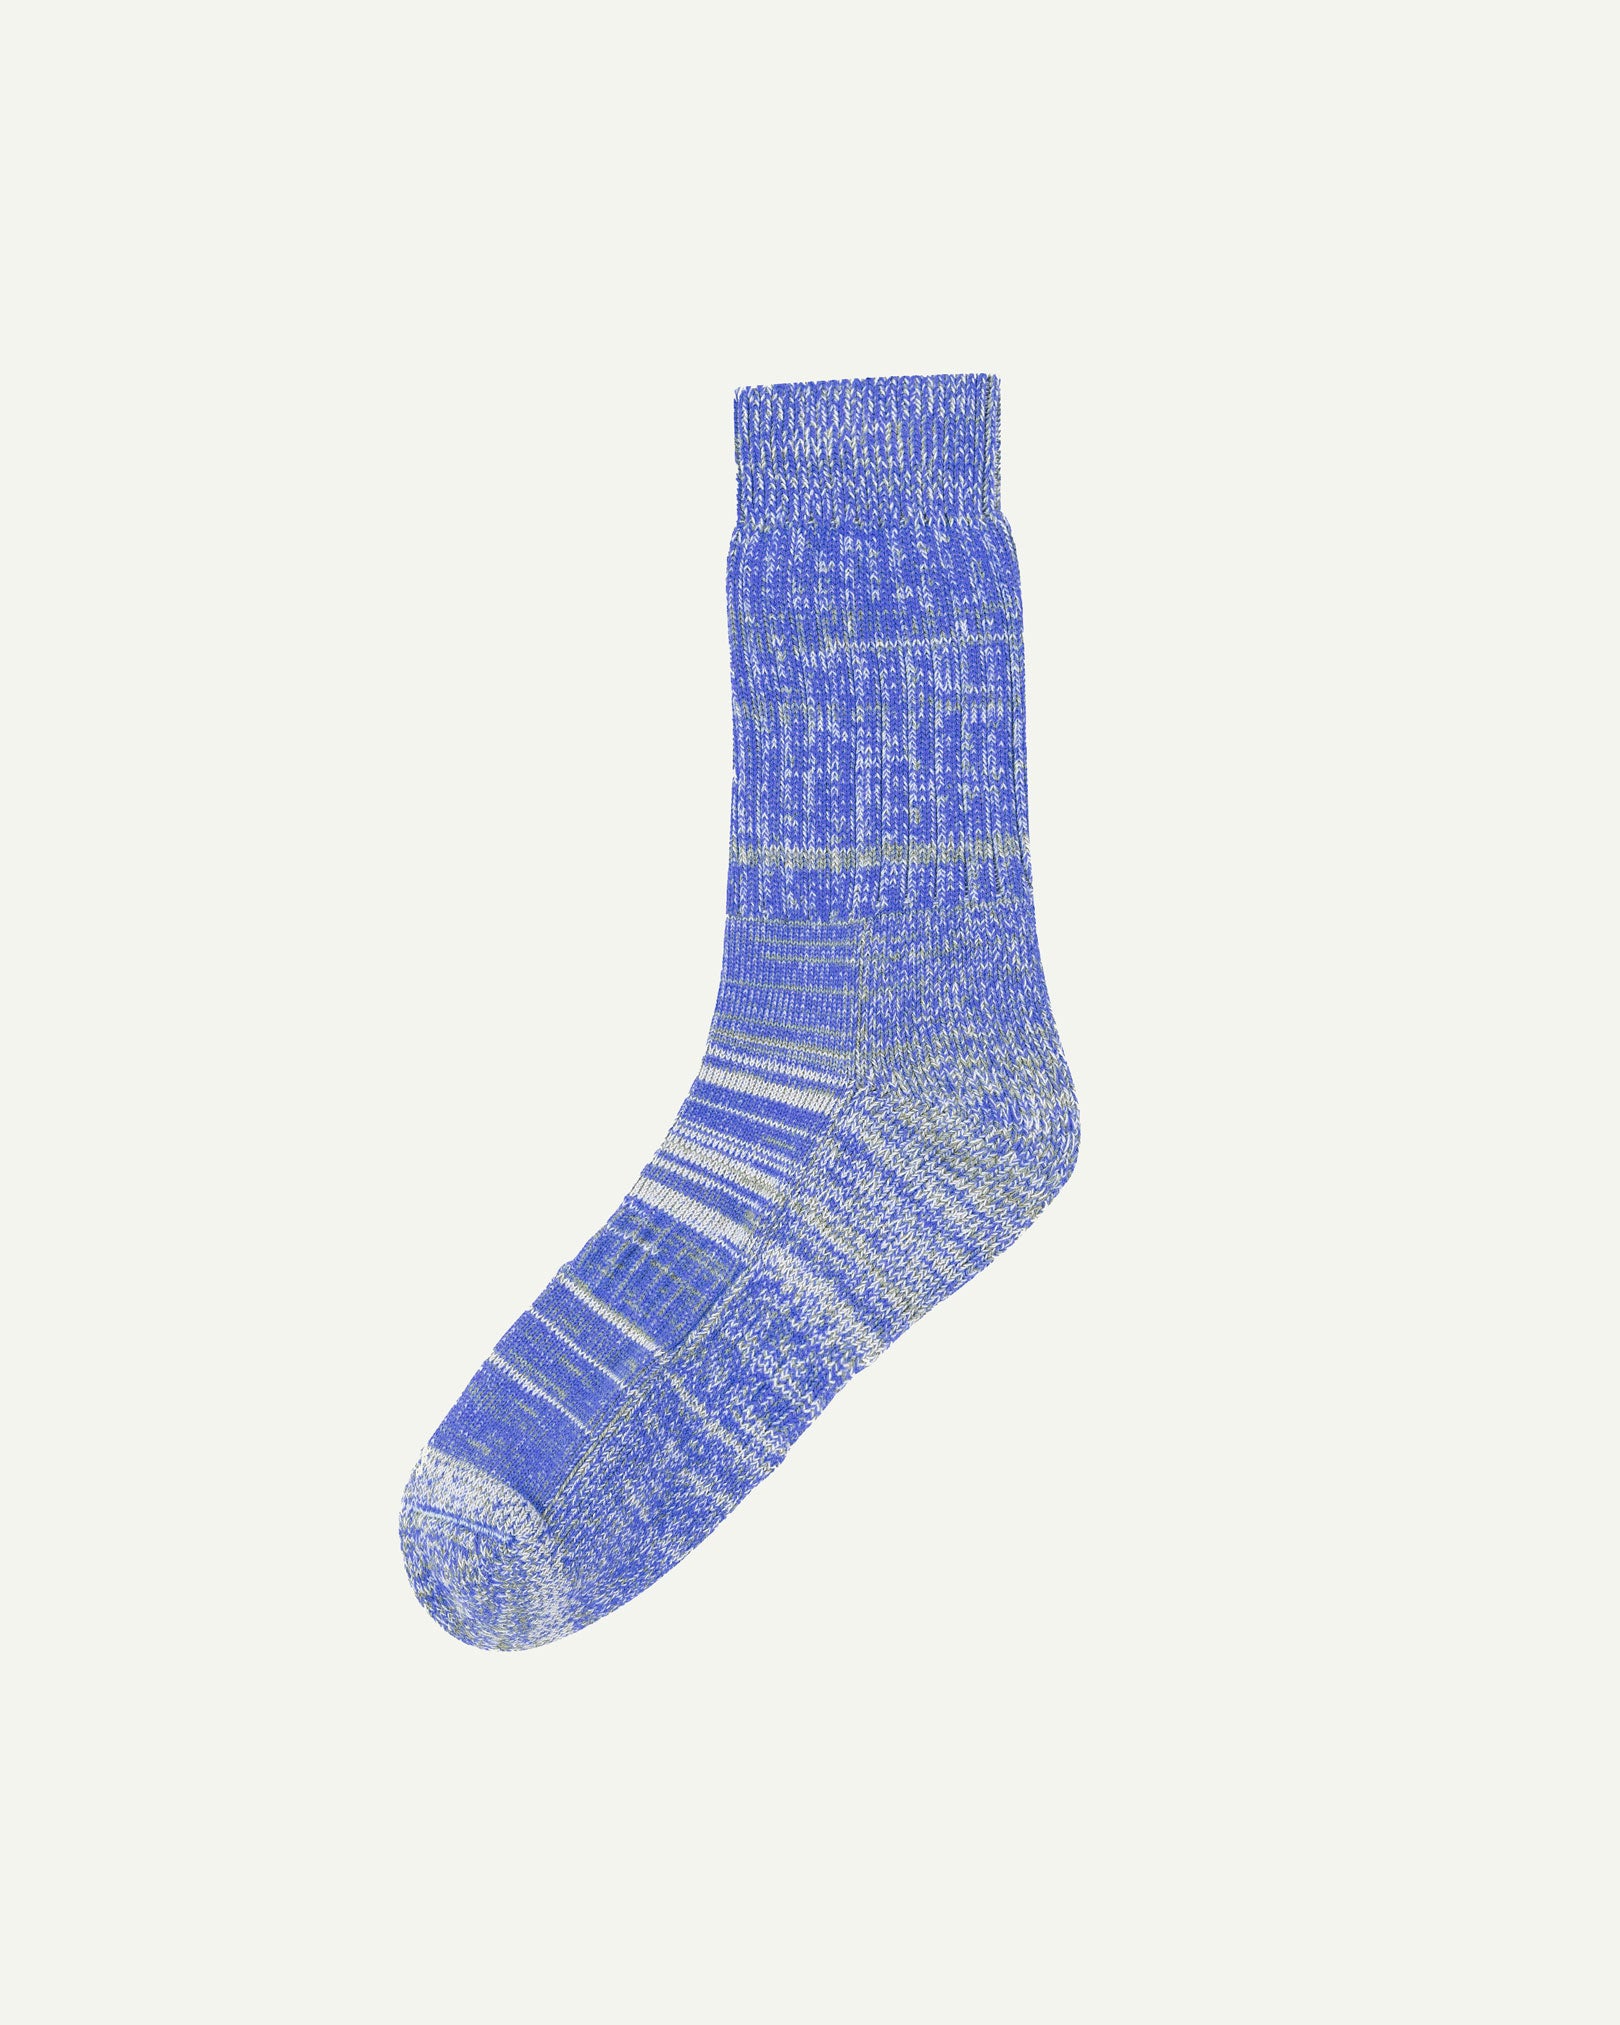 Flat view of Uskees 4006 organic cotton socks in ultra blue, showing subtle bands of blue, white and black